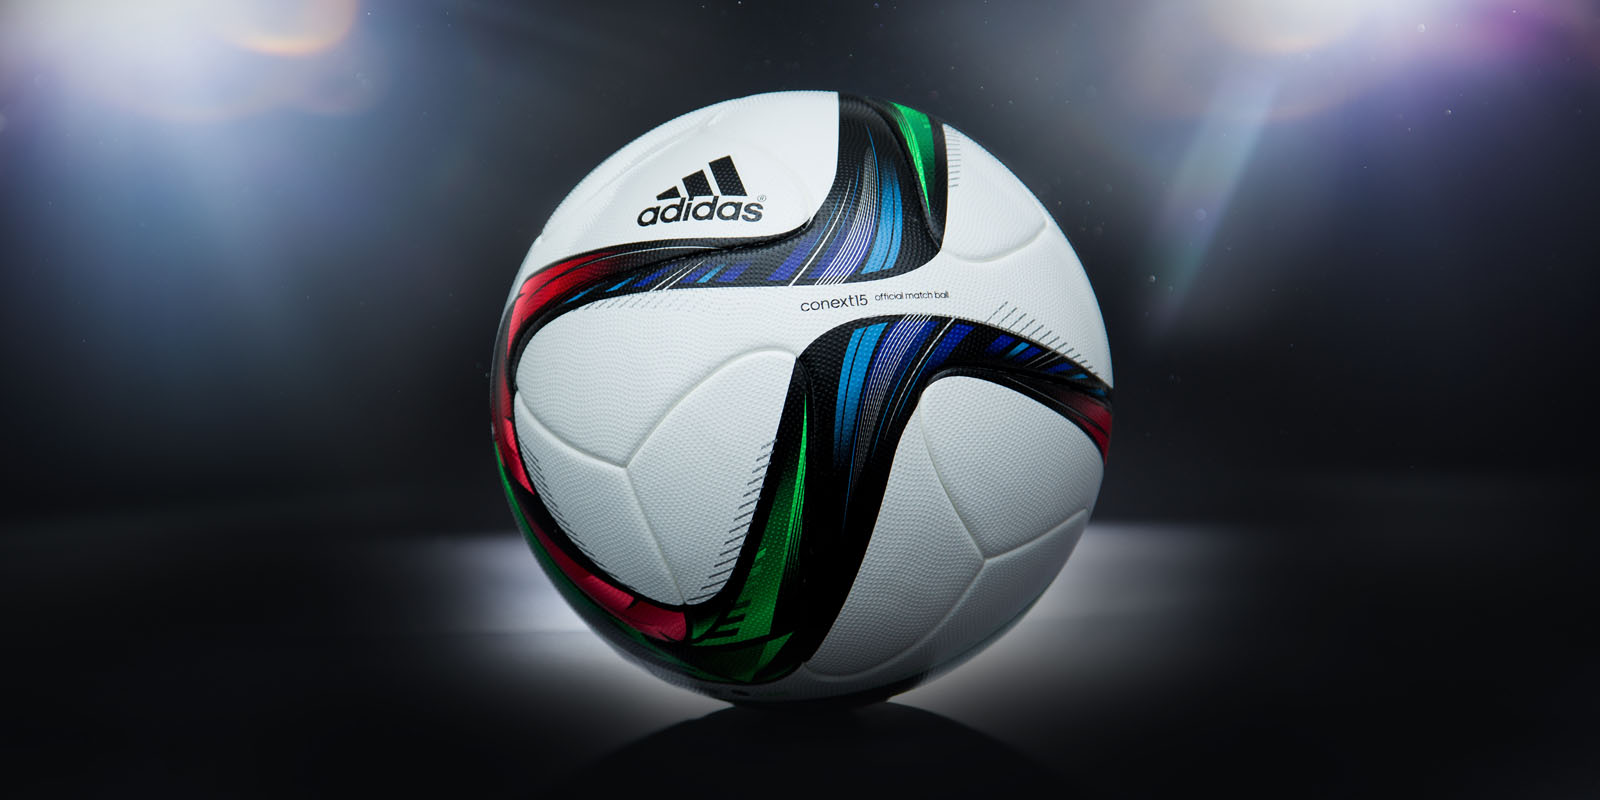 🔶️ADIDAS BRAZUCA 2 CONEXT15 OFFICIAL MATCH BALL FIFA WORLD CUP SAMPLE  SOCCER